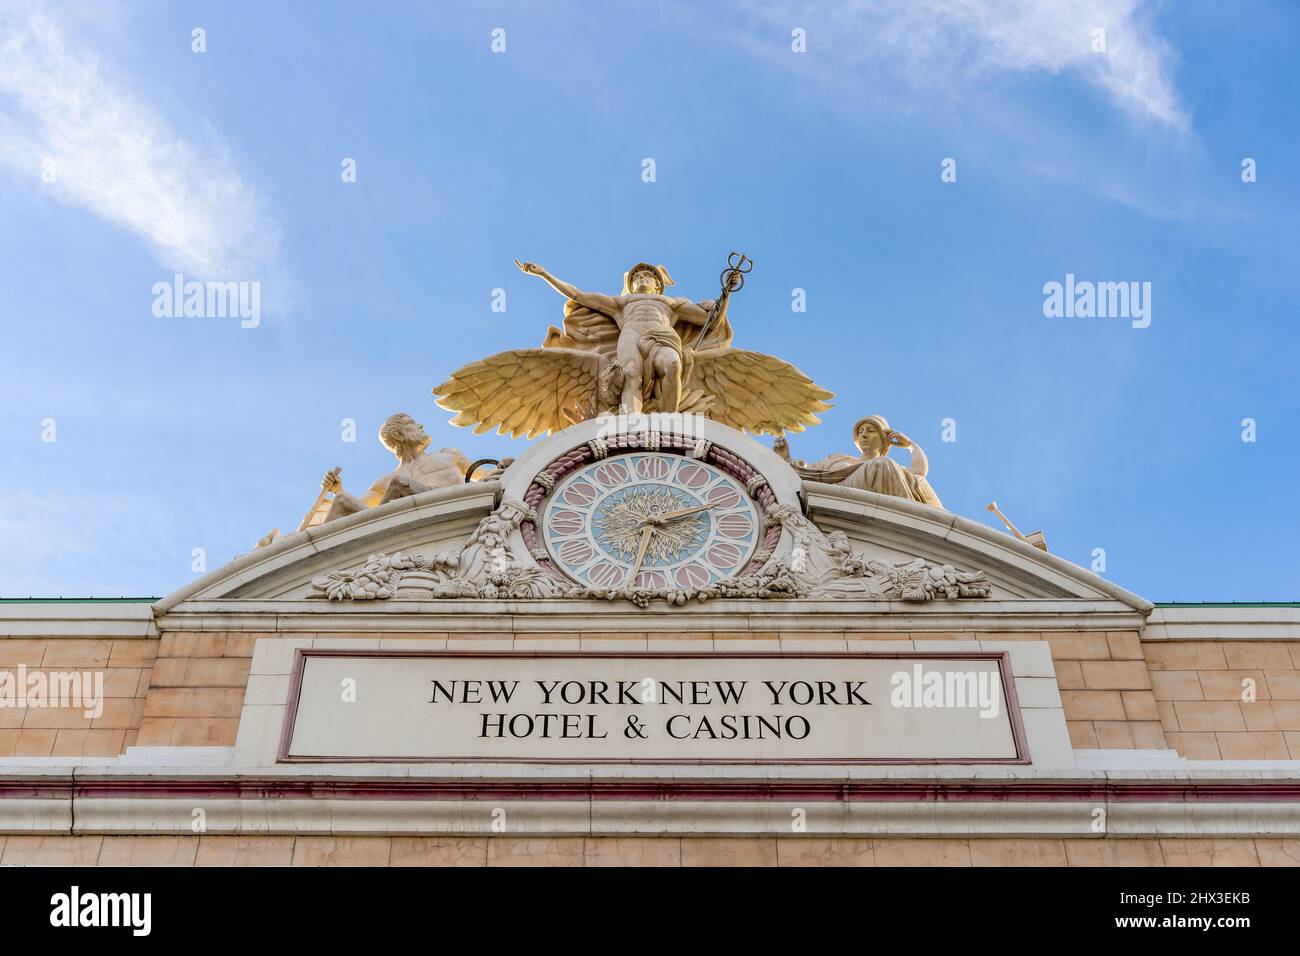 Las Vegas, NV - December 15, 2021: The Glory of Commerce sculpture, depicting Minerva, Mercury and Hercules, and a clock is over the entrance to the N Stock Photo